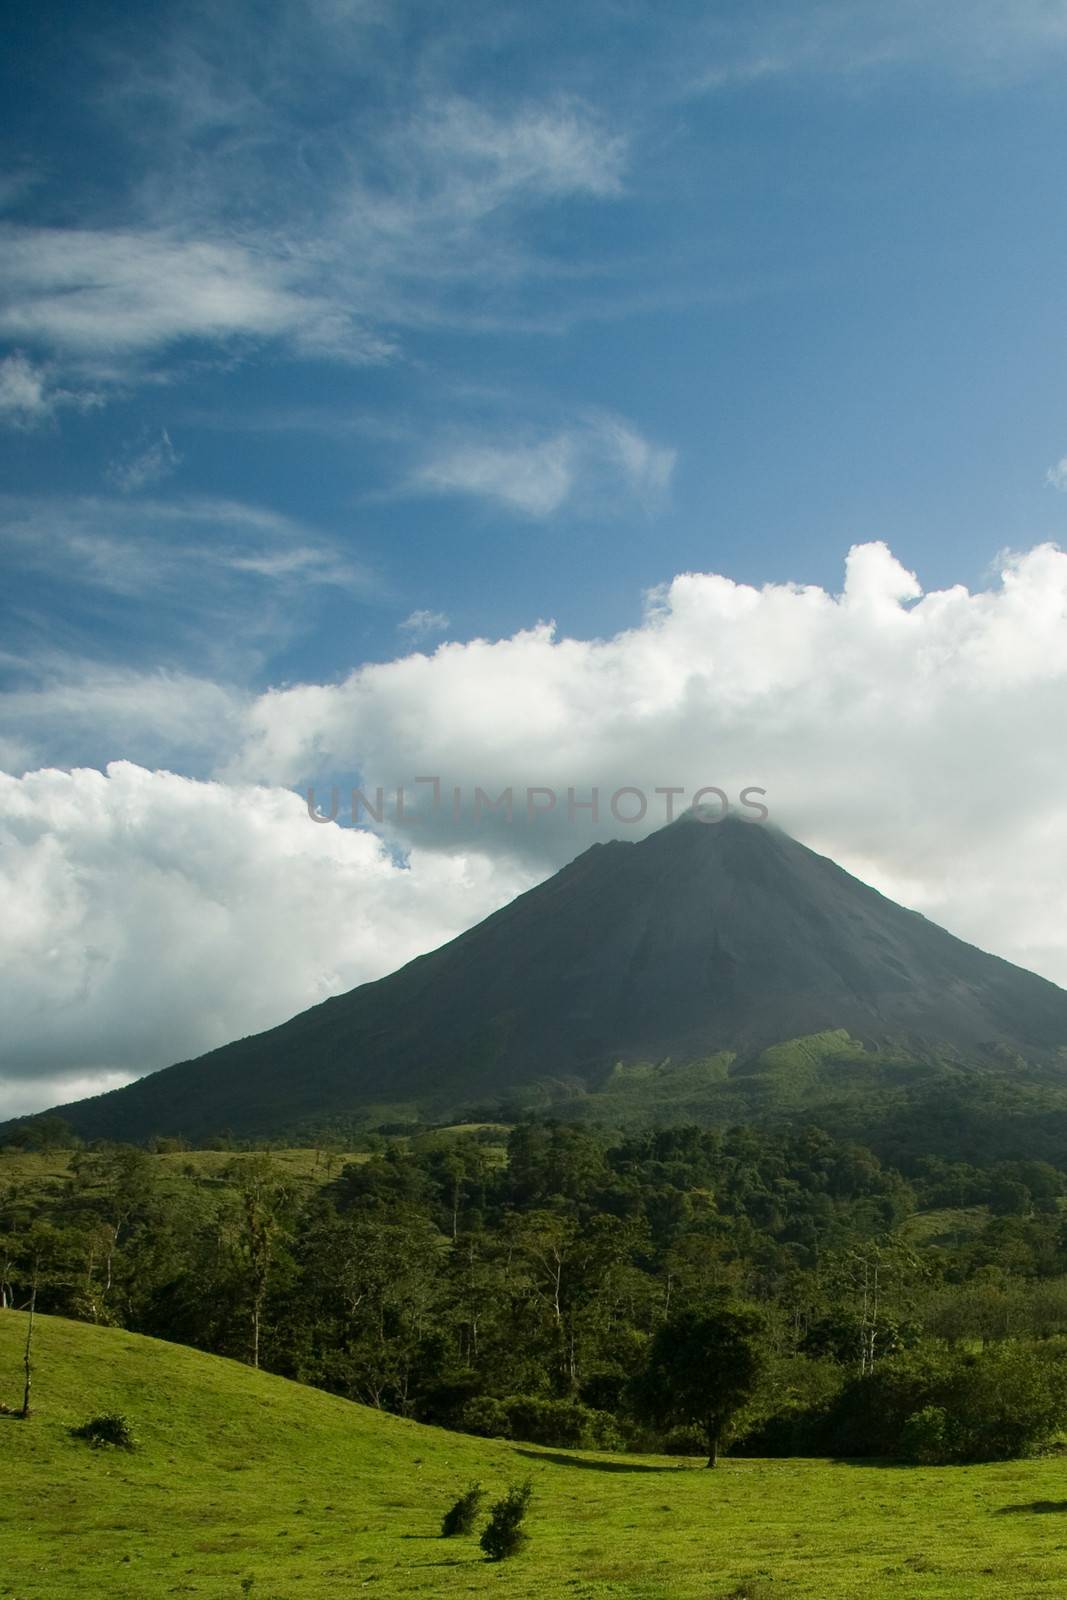 A view of the Arenal volcano in Costa Rica.